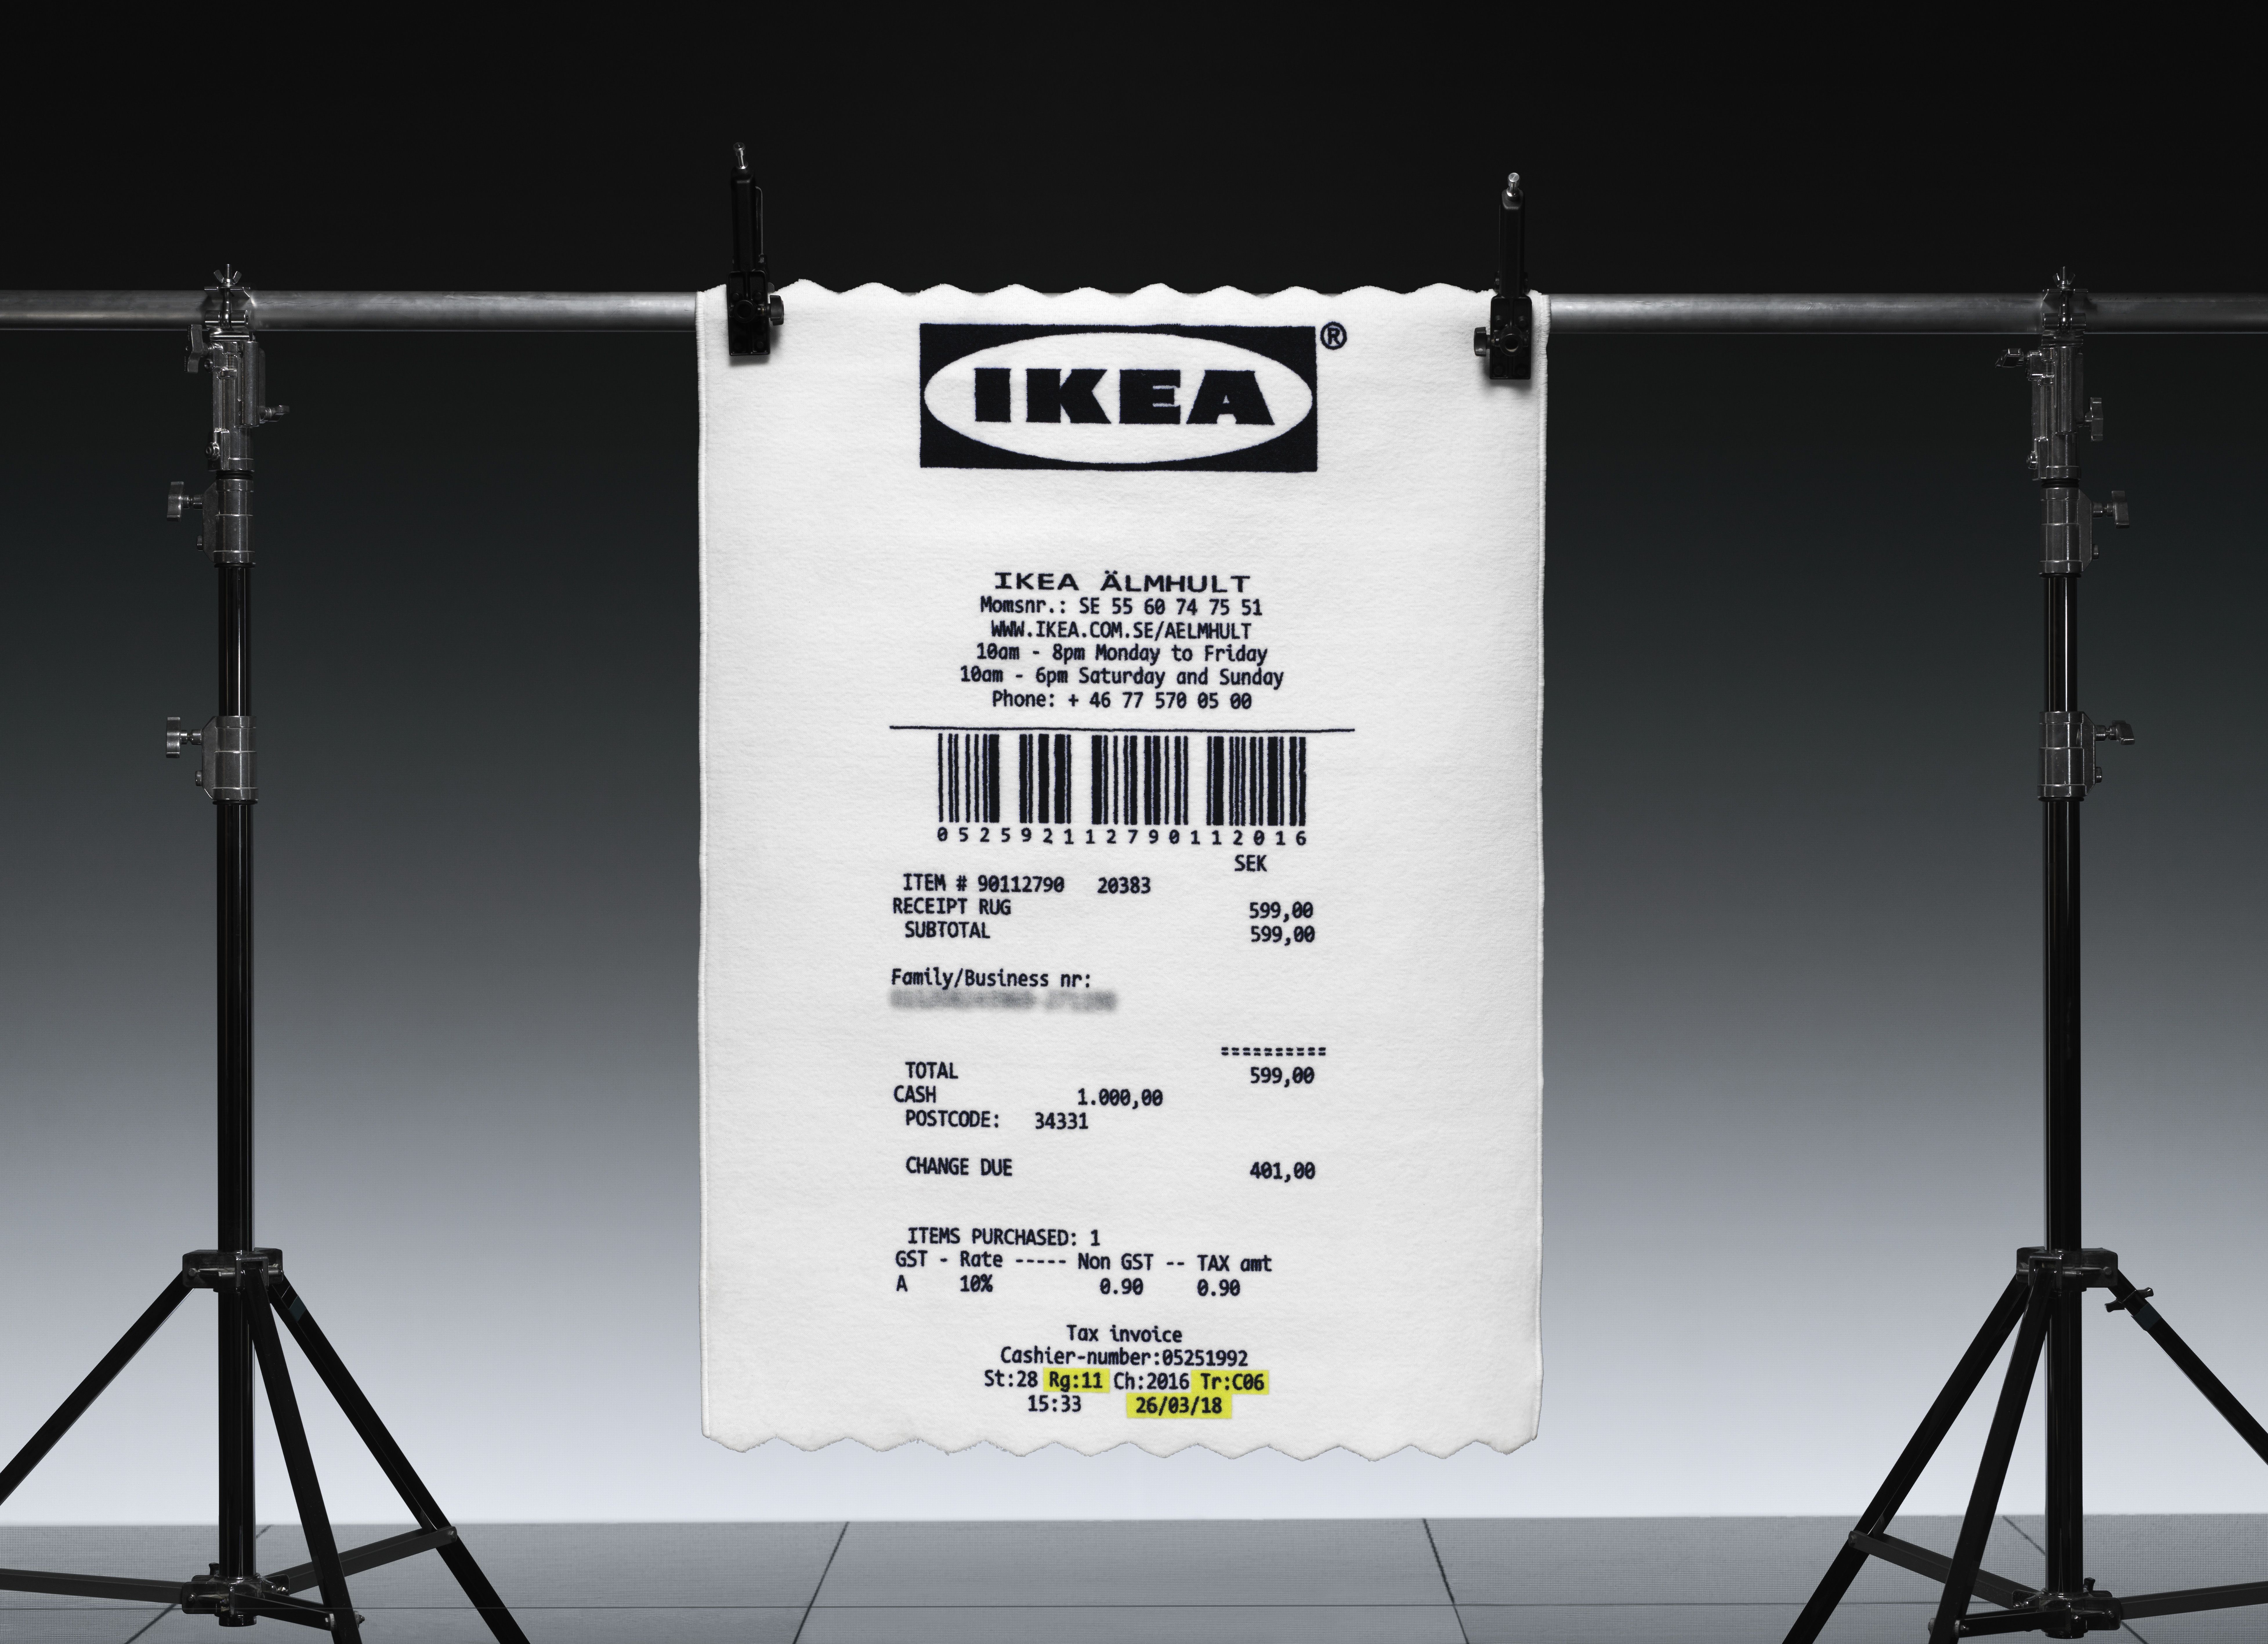 Must Read: A First Look at the Ikea x Virgil Abloh Collaboration